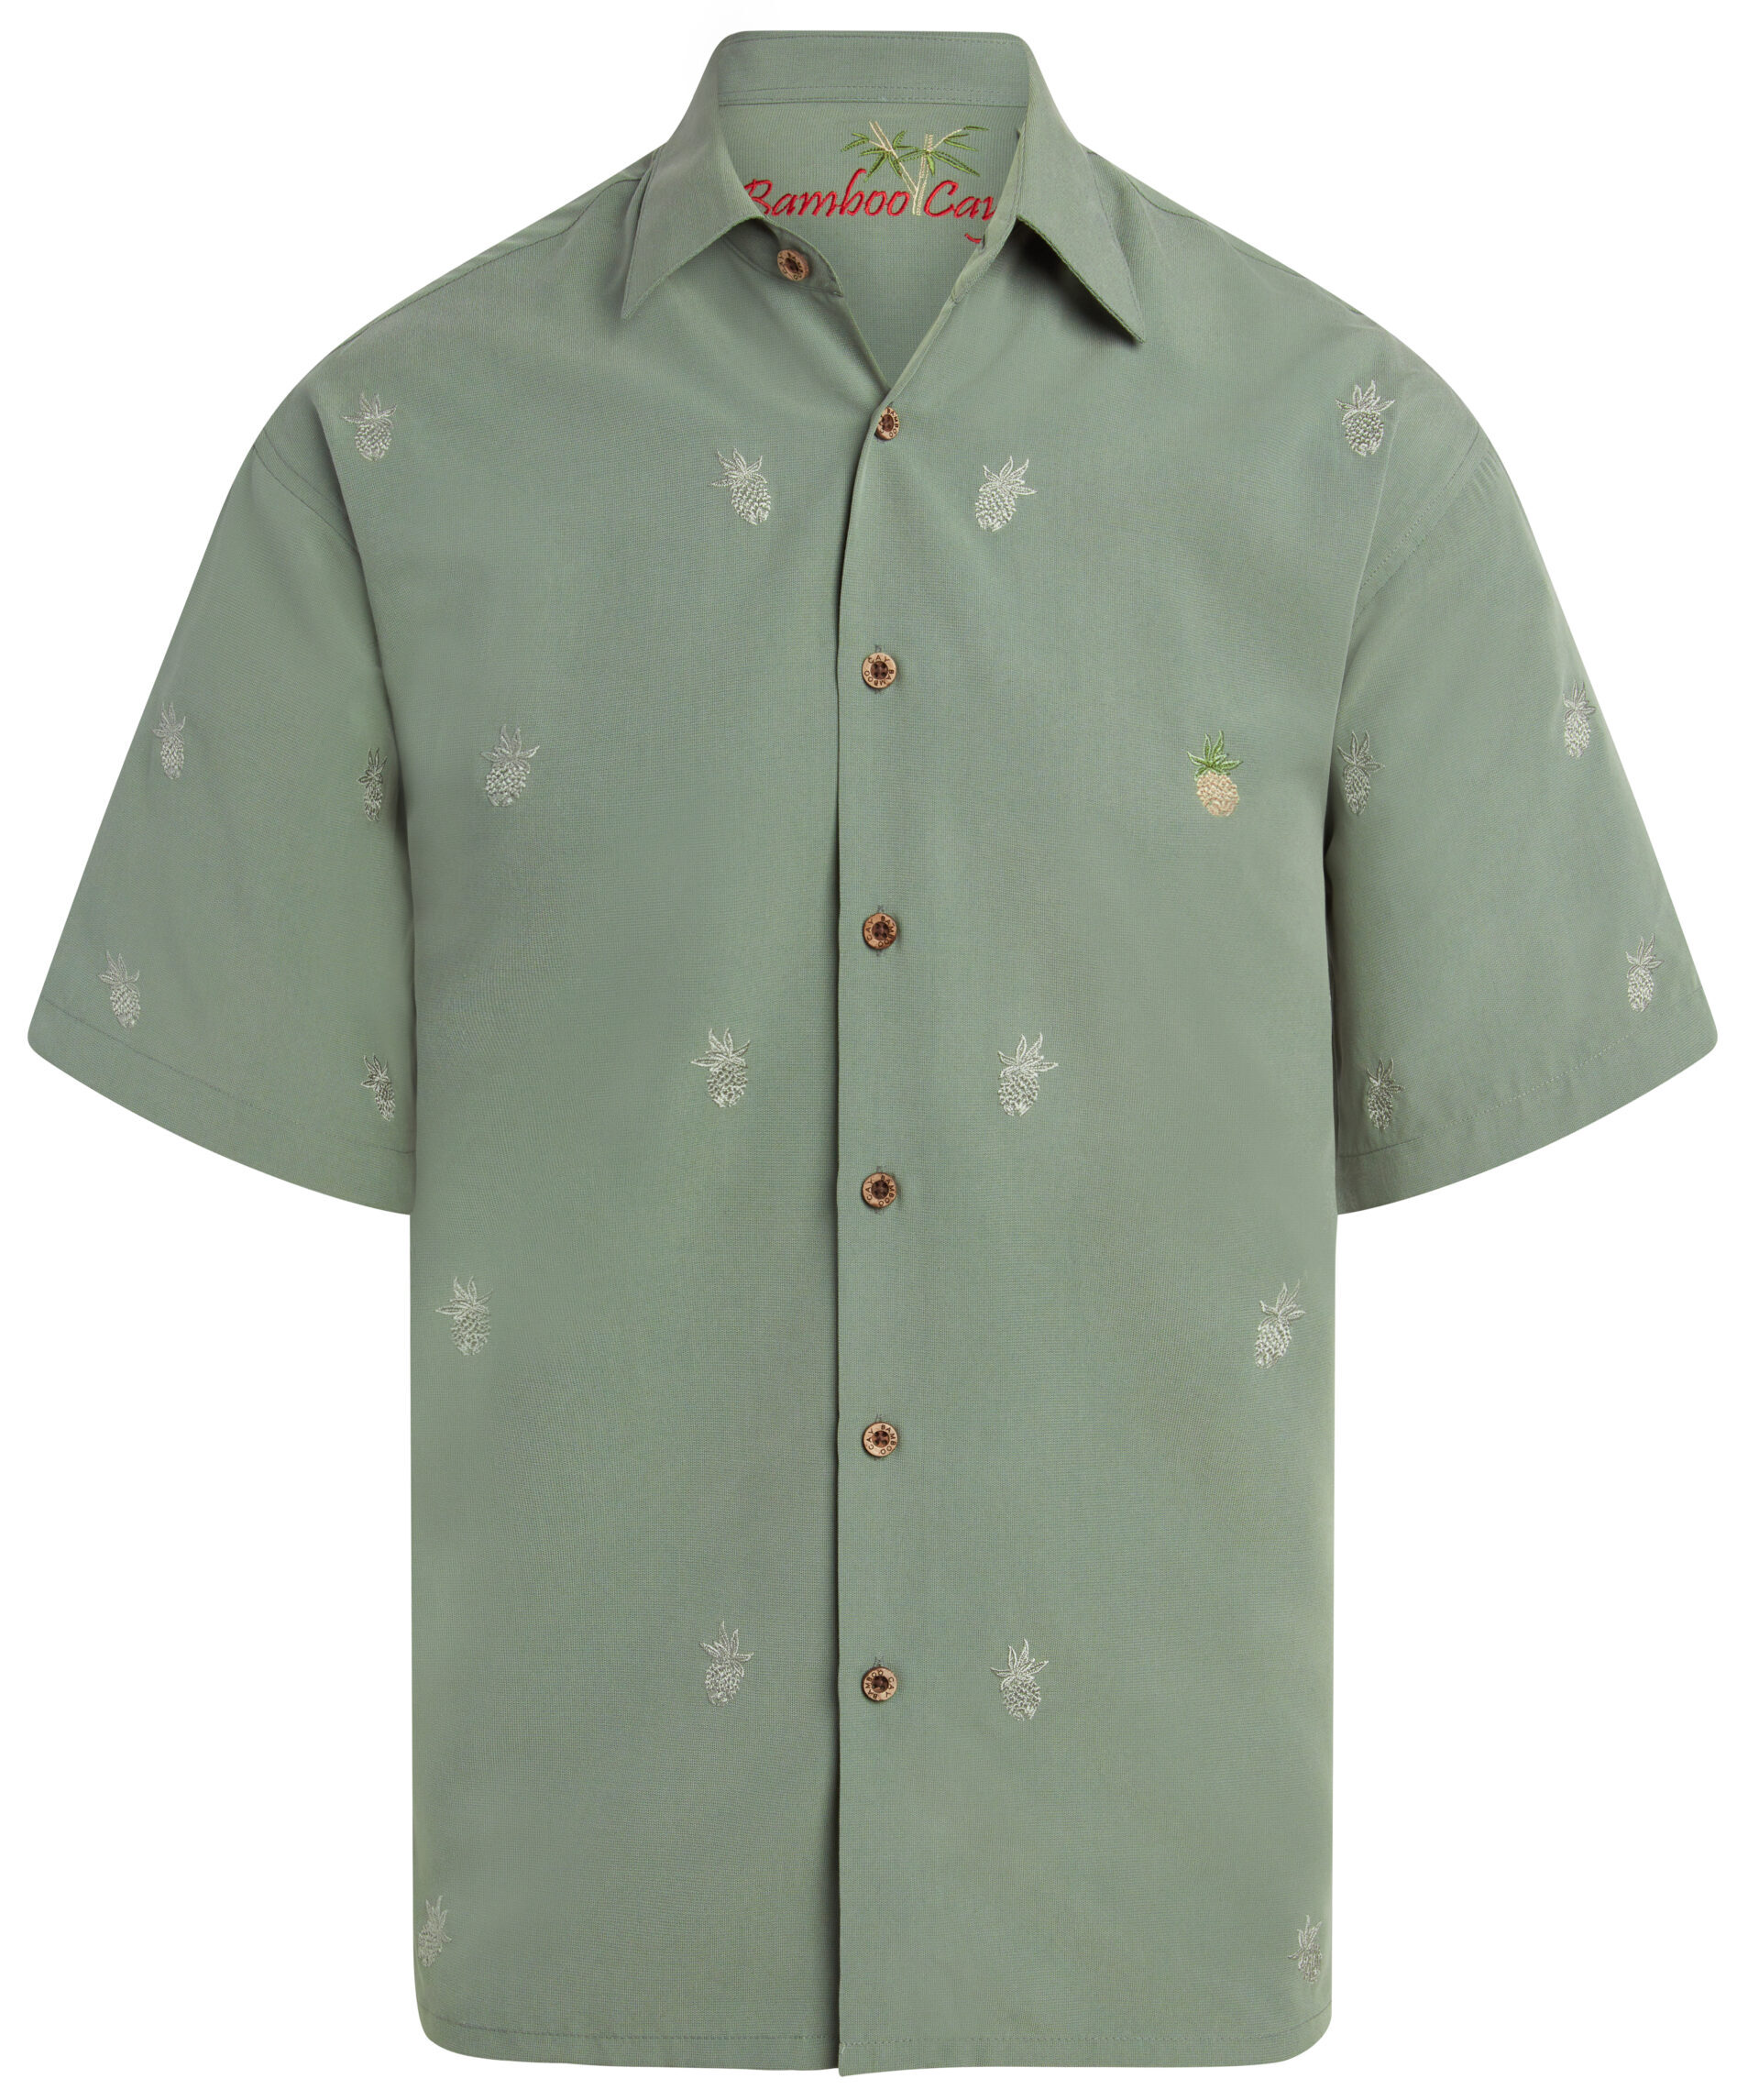 Bamboo Cay short sleeve shirt embroidered pineapple design